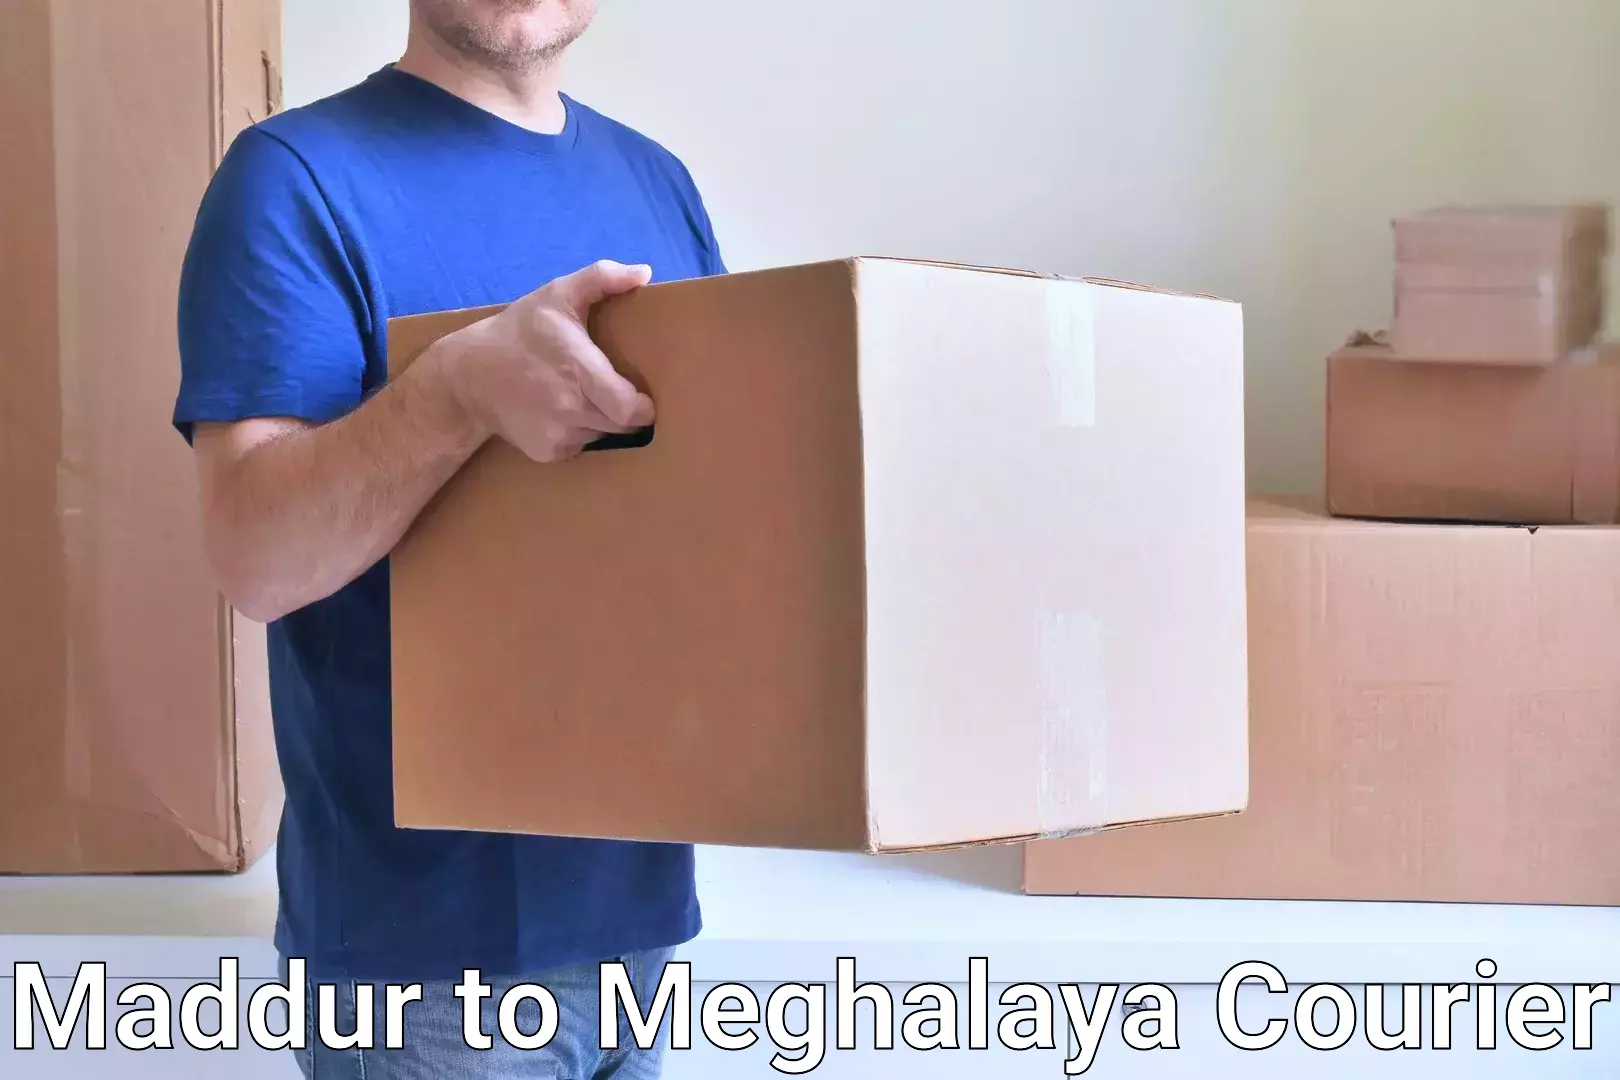 Courier service partnerships Maddur to Nongpoh